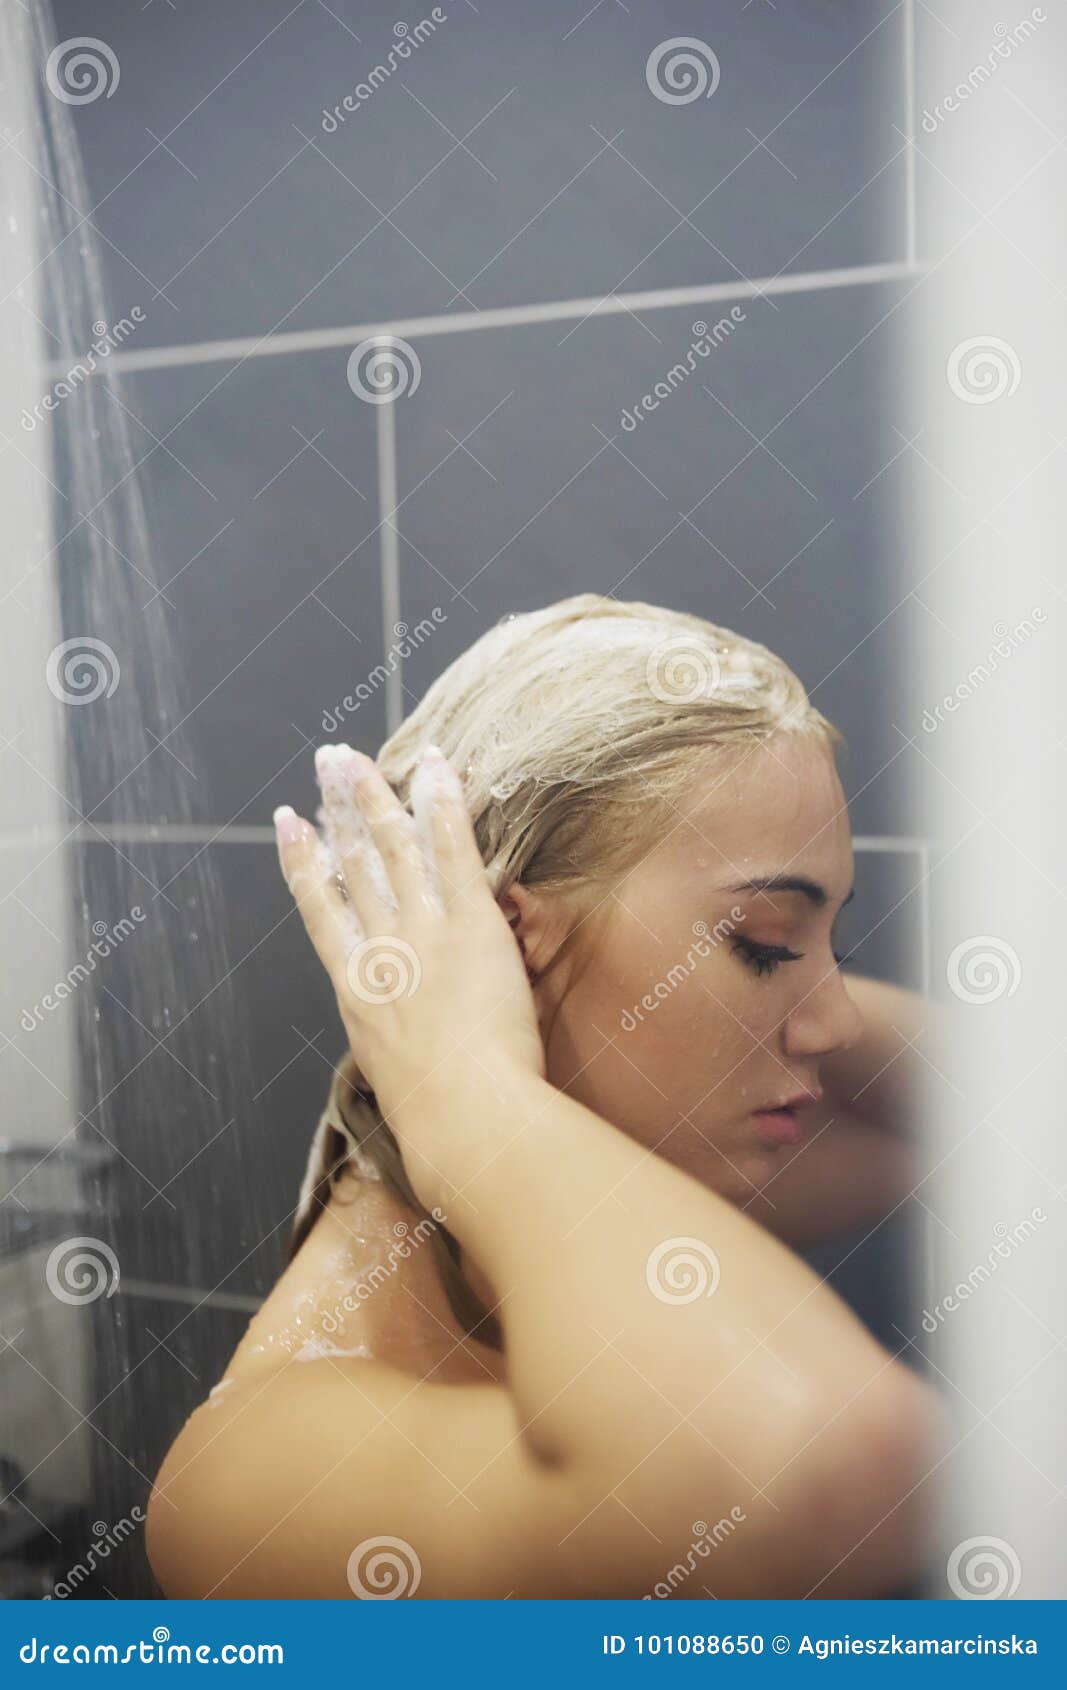 sexy nude girl taking shower